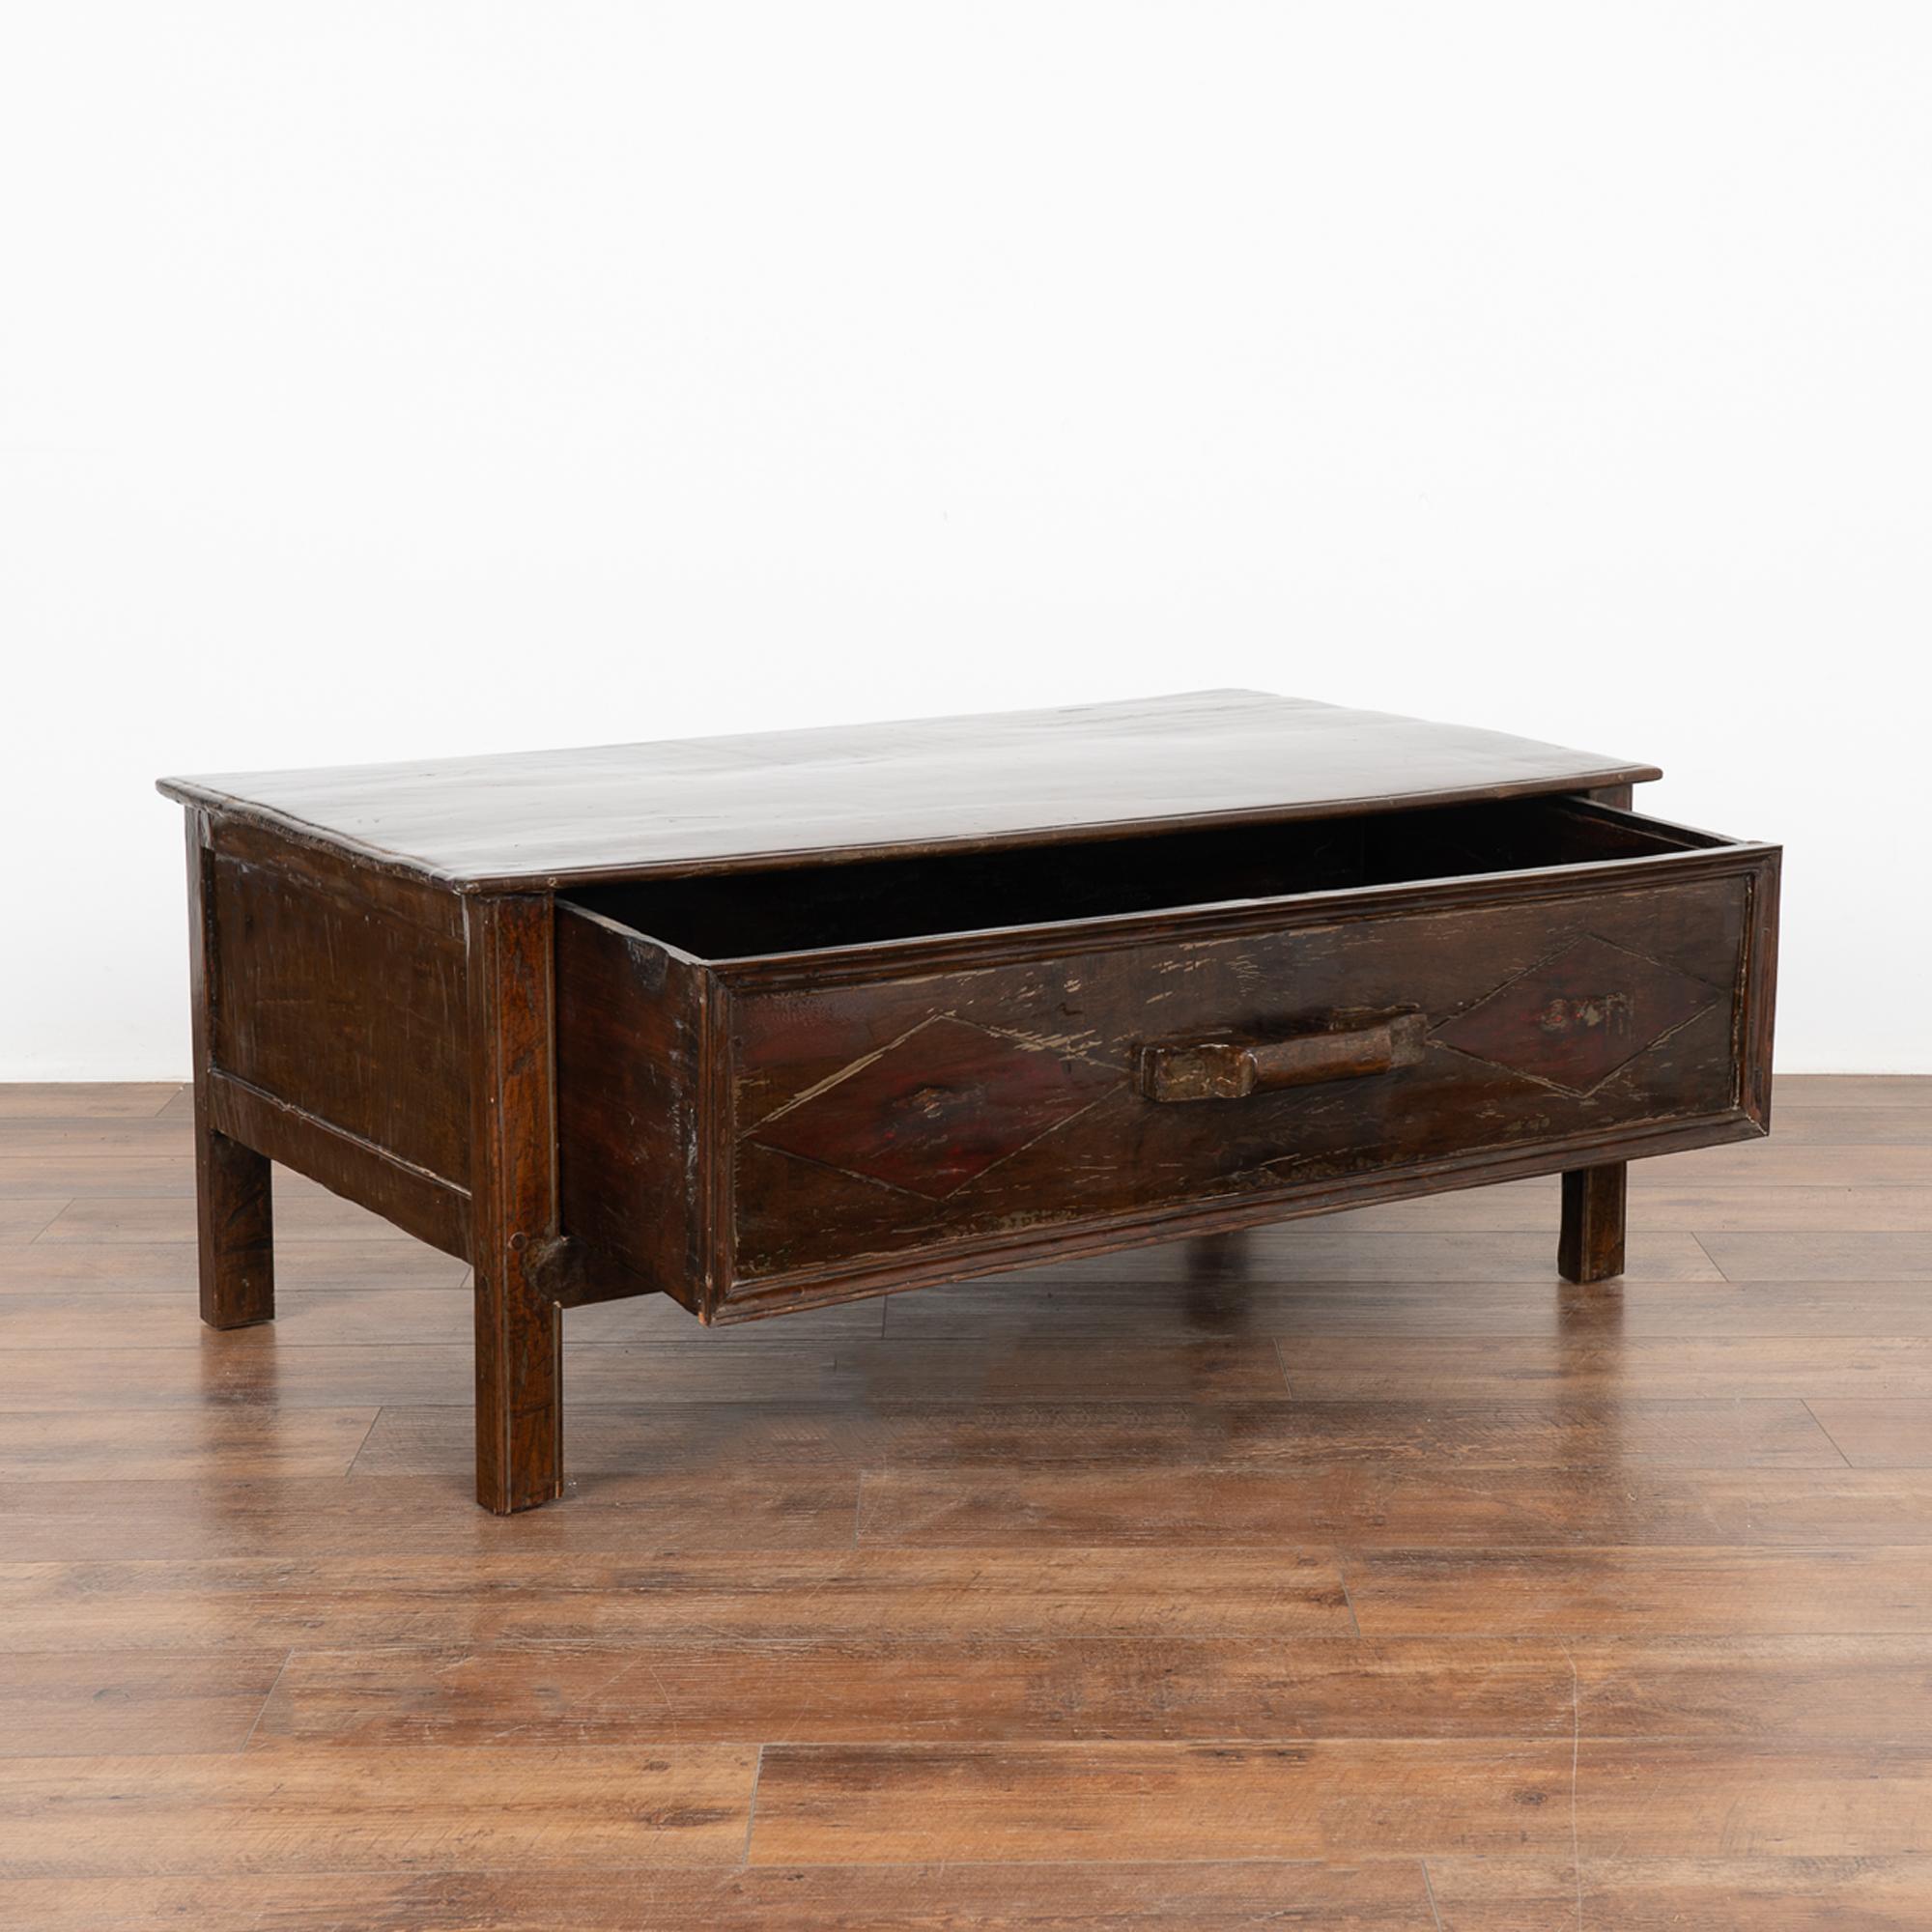 Chinese Export Chinese Lacquered Coffee Table With Large Drawer, circa 1900